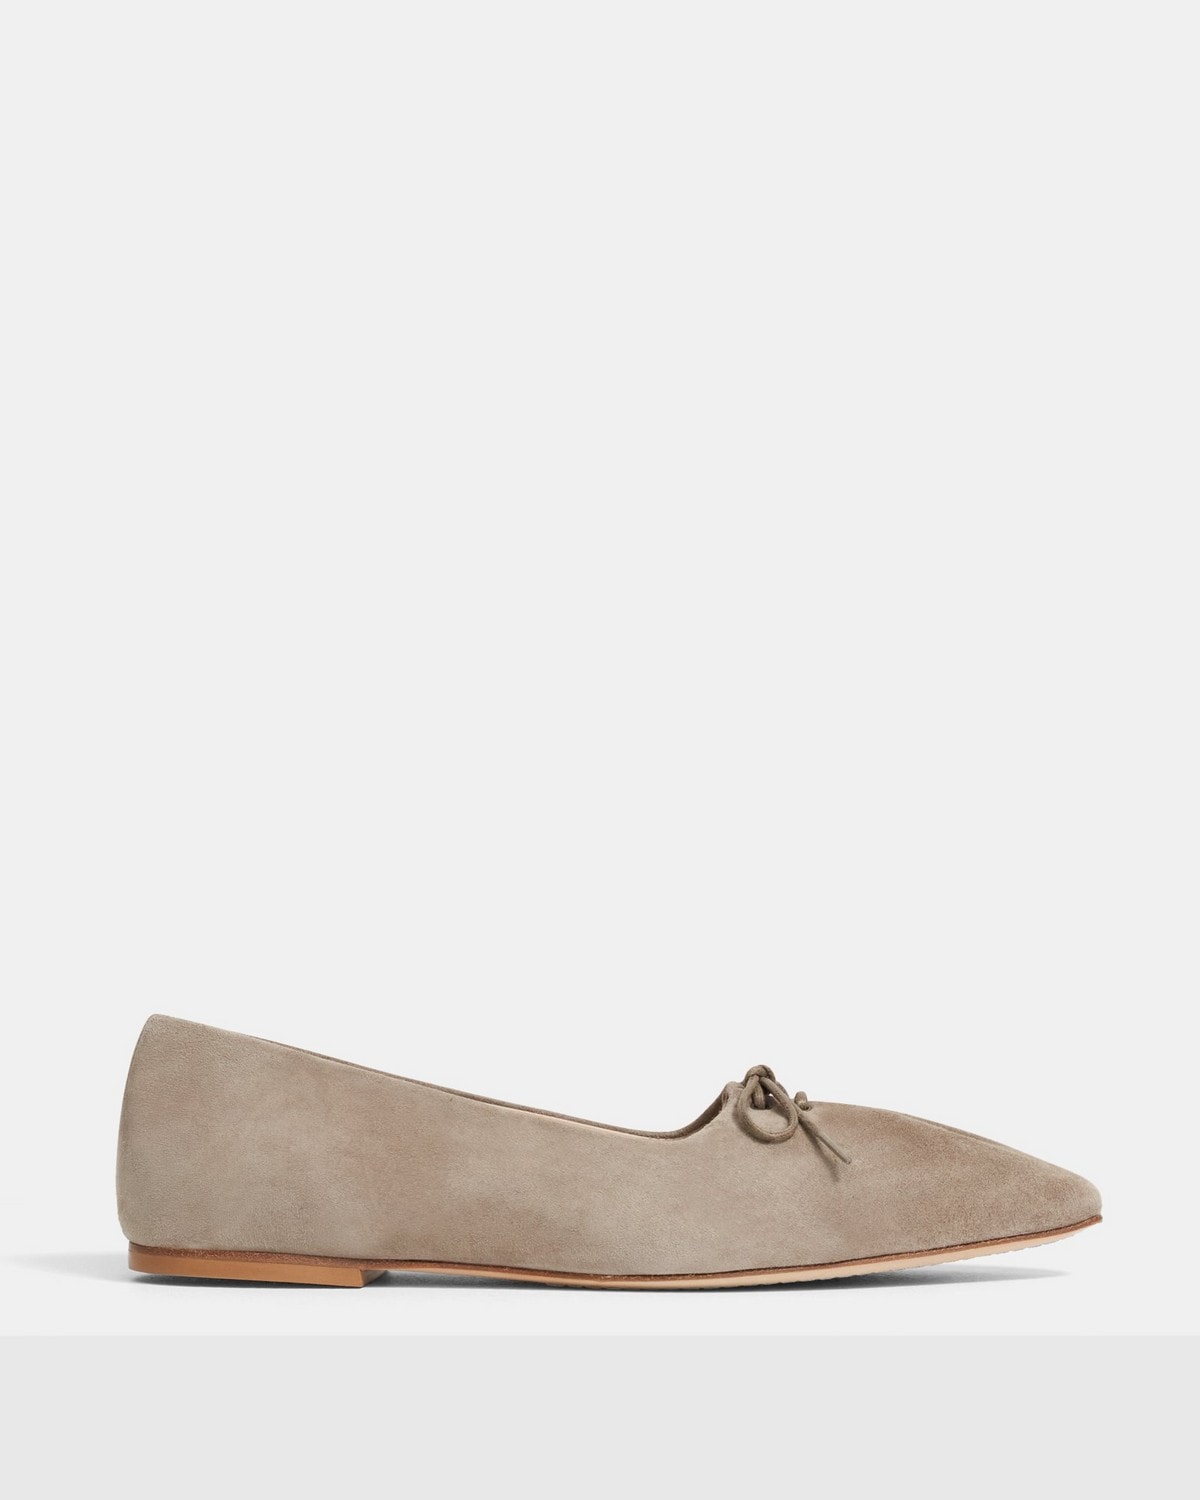 Theory Pleated Ballet Flat in Suede